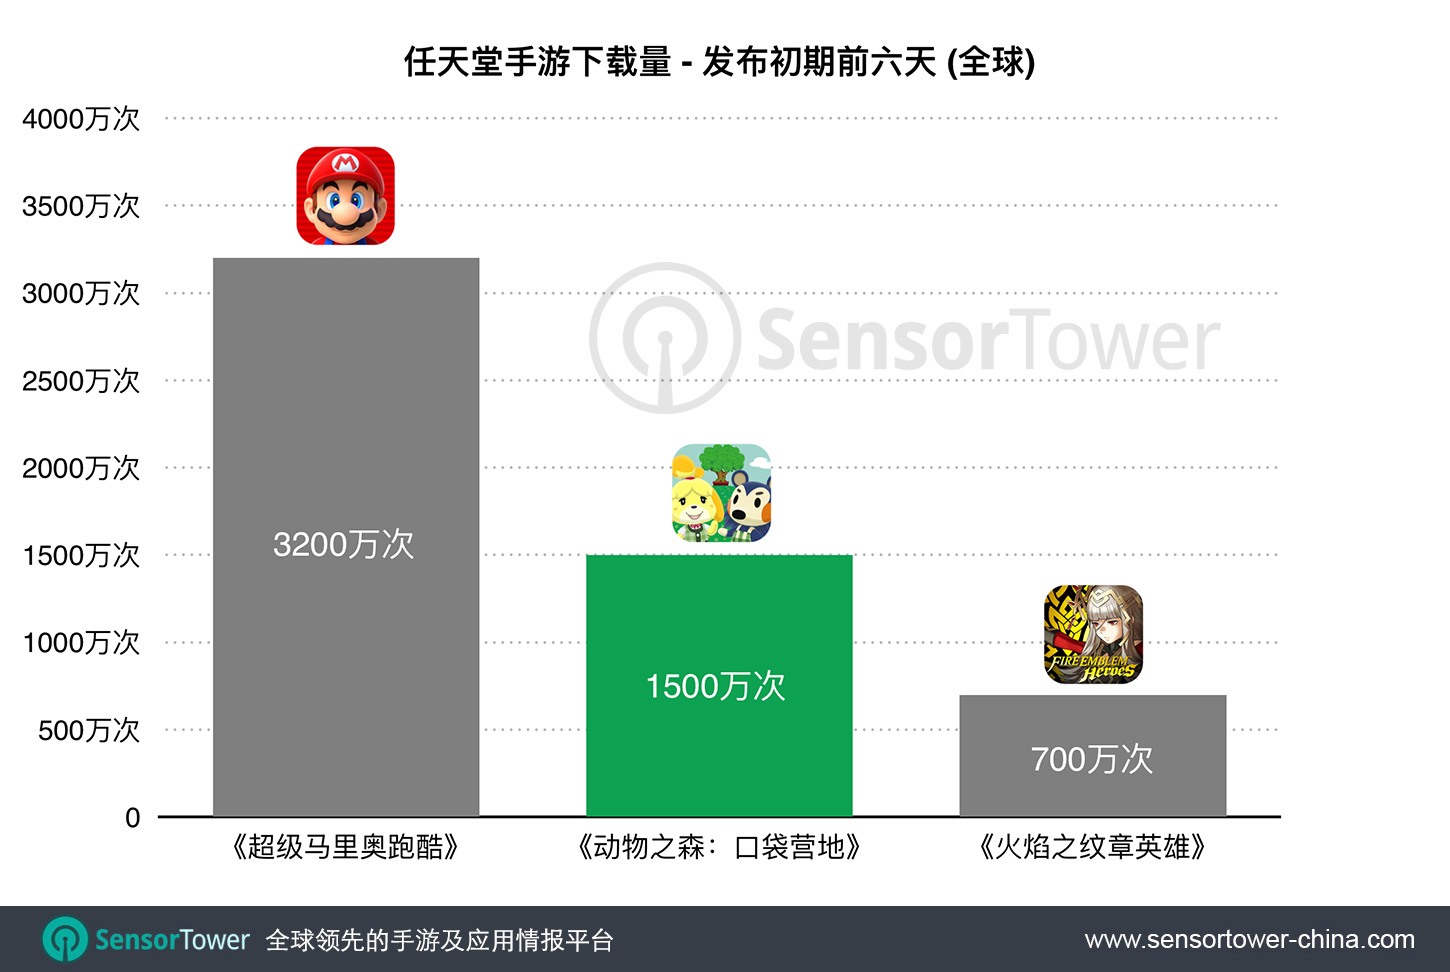 First six day downloads of Animal Crossing: Pocket Camp compared to Super Mario Run and Fire Emblem Heroes